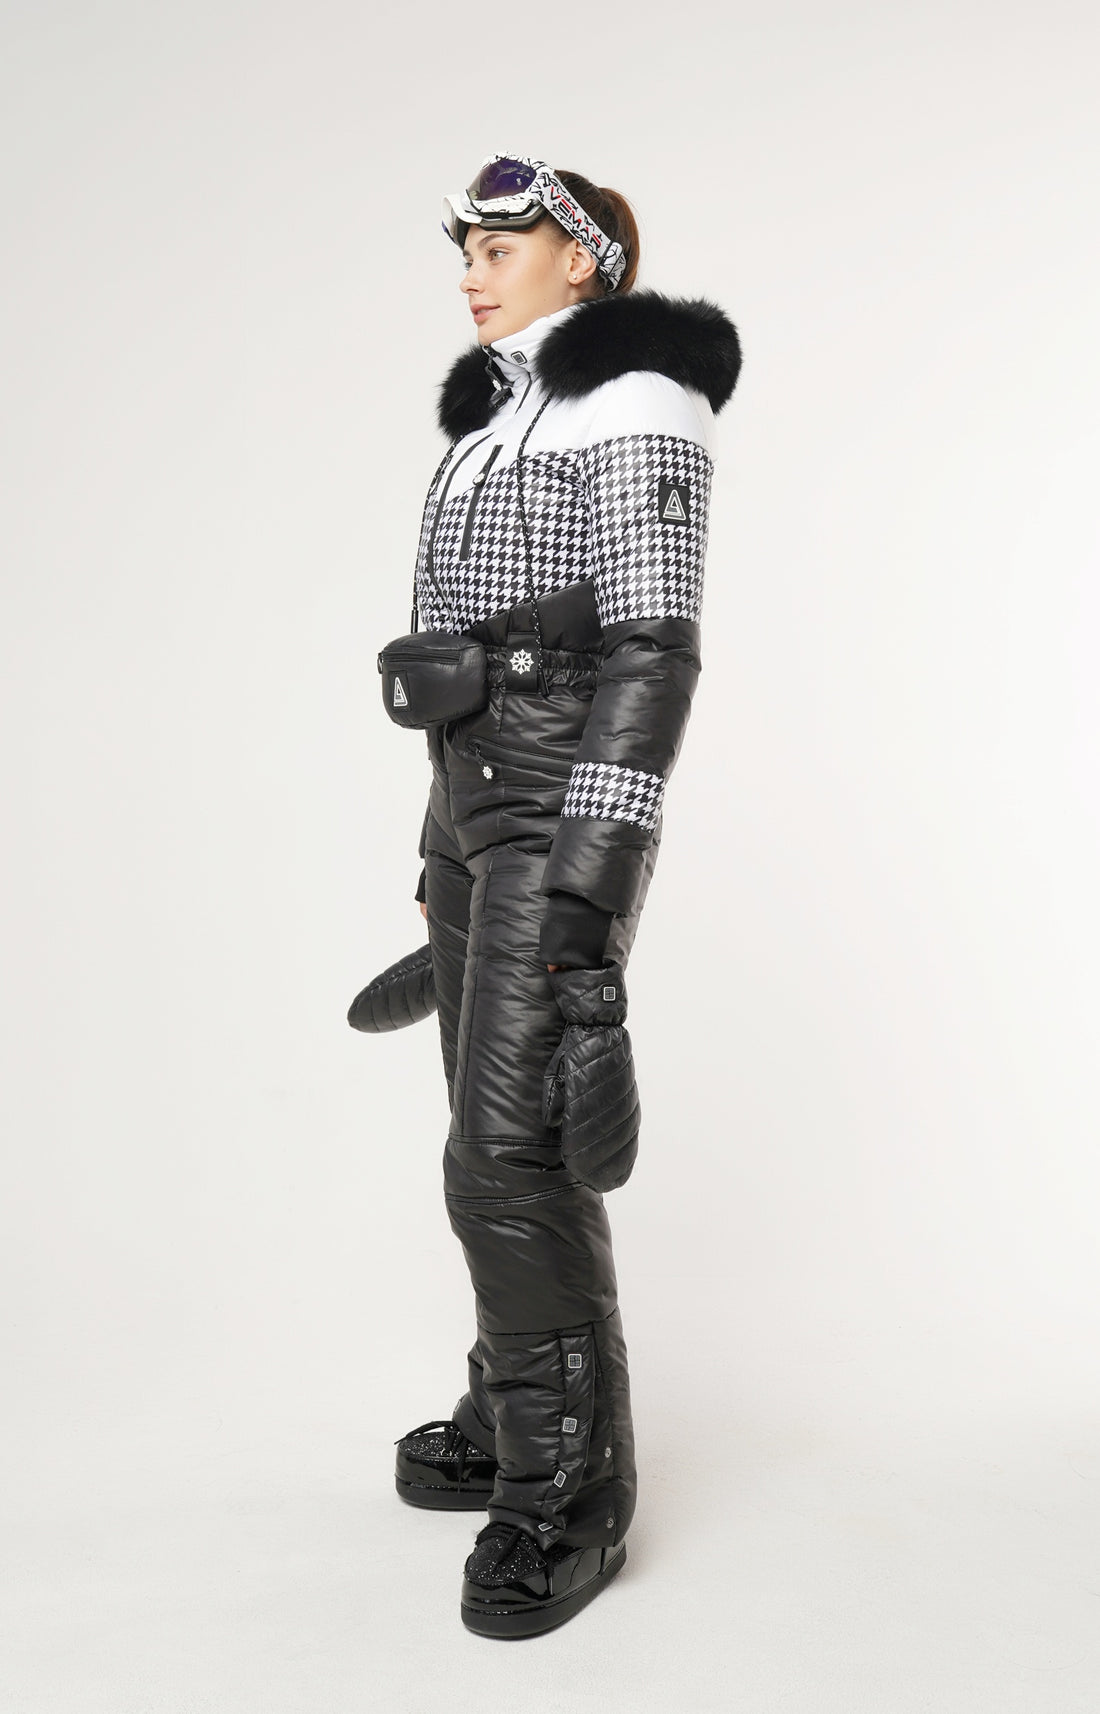 HOUNDSTOOTH INSERTS SKI SNOW SUIT ELBERT - WINTER WARM JUMPSUIT WITH MITTENS AND BAG